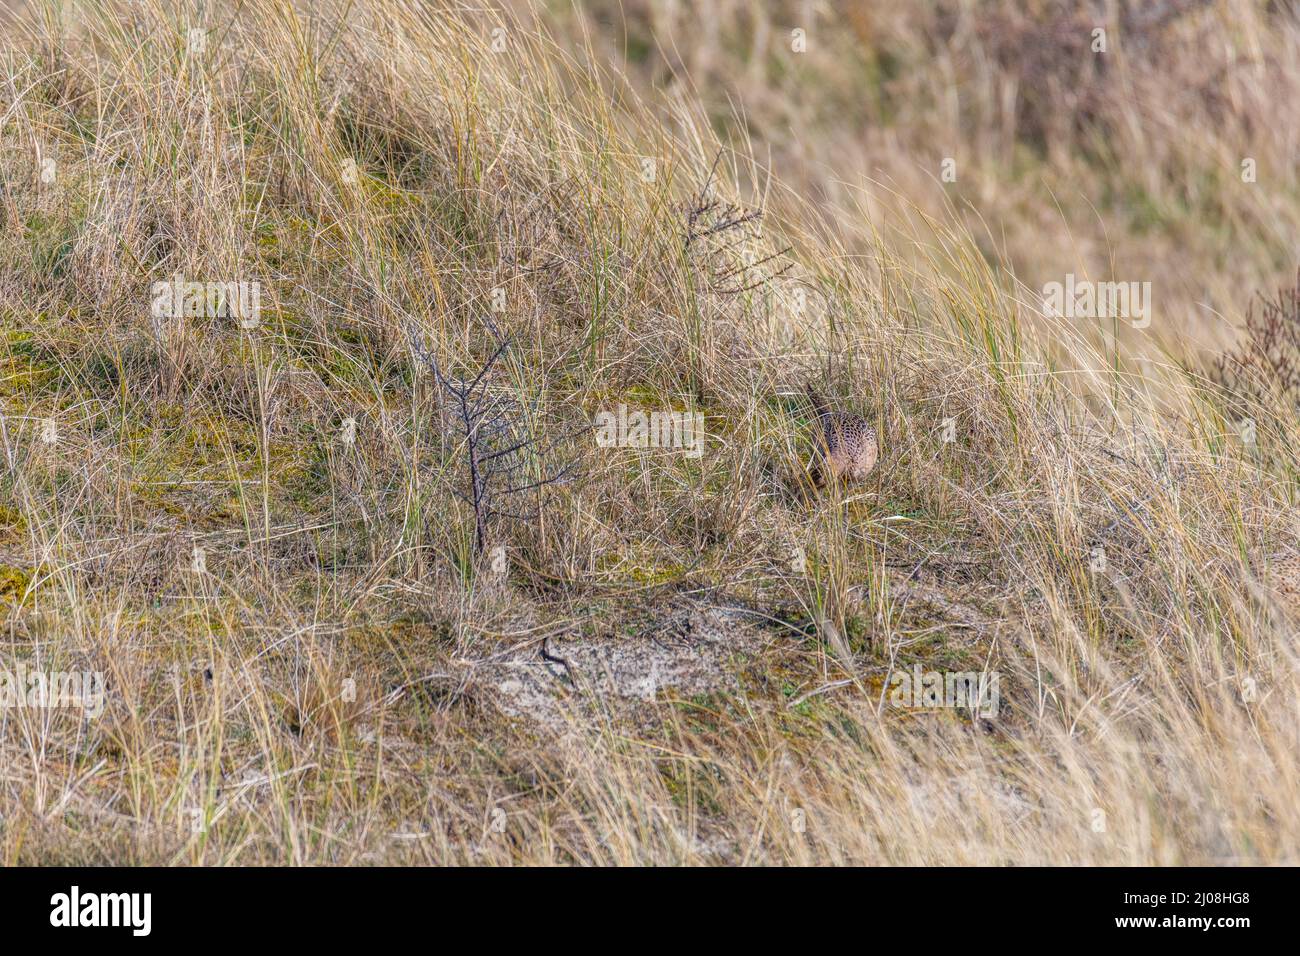 a female pheasant  on the island of juist between the dunes Stock Photo